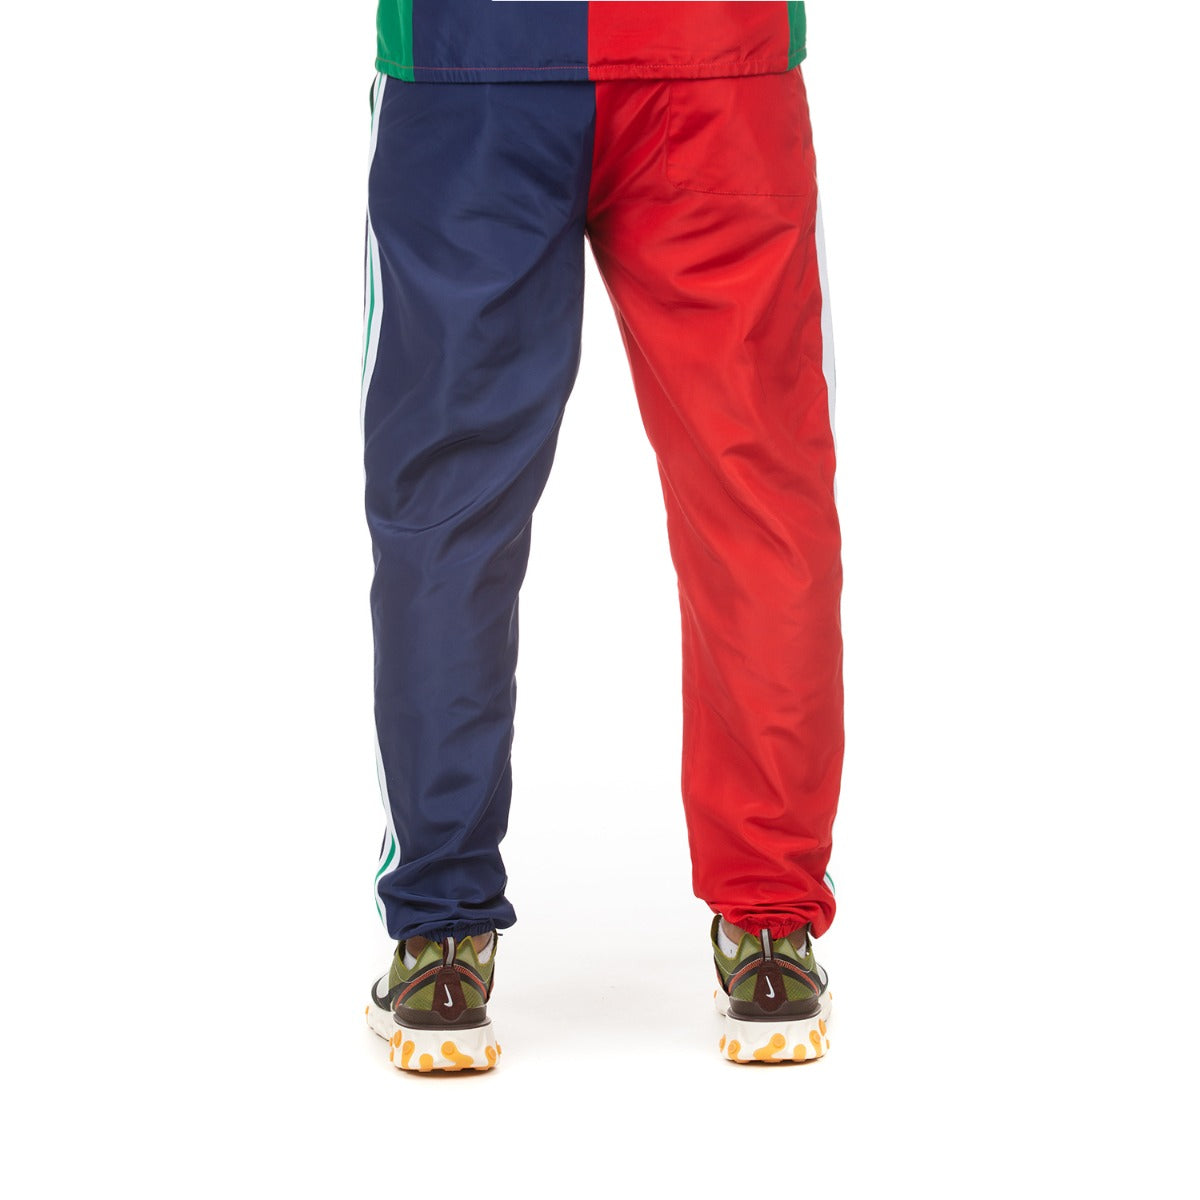 Weather-Resistant Athletic Green and Red Sweatpants with Stylish Patches - Def Defy Pant